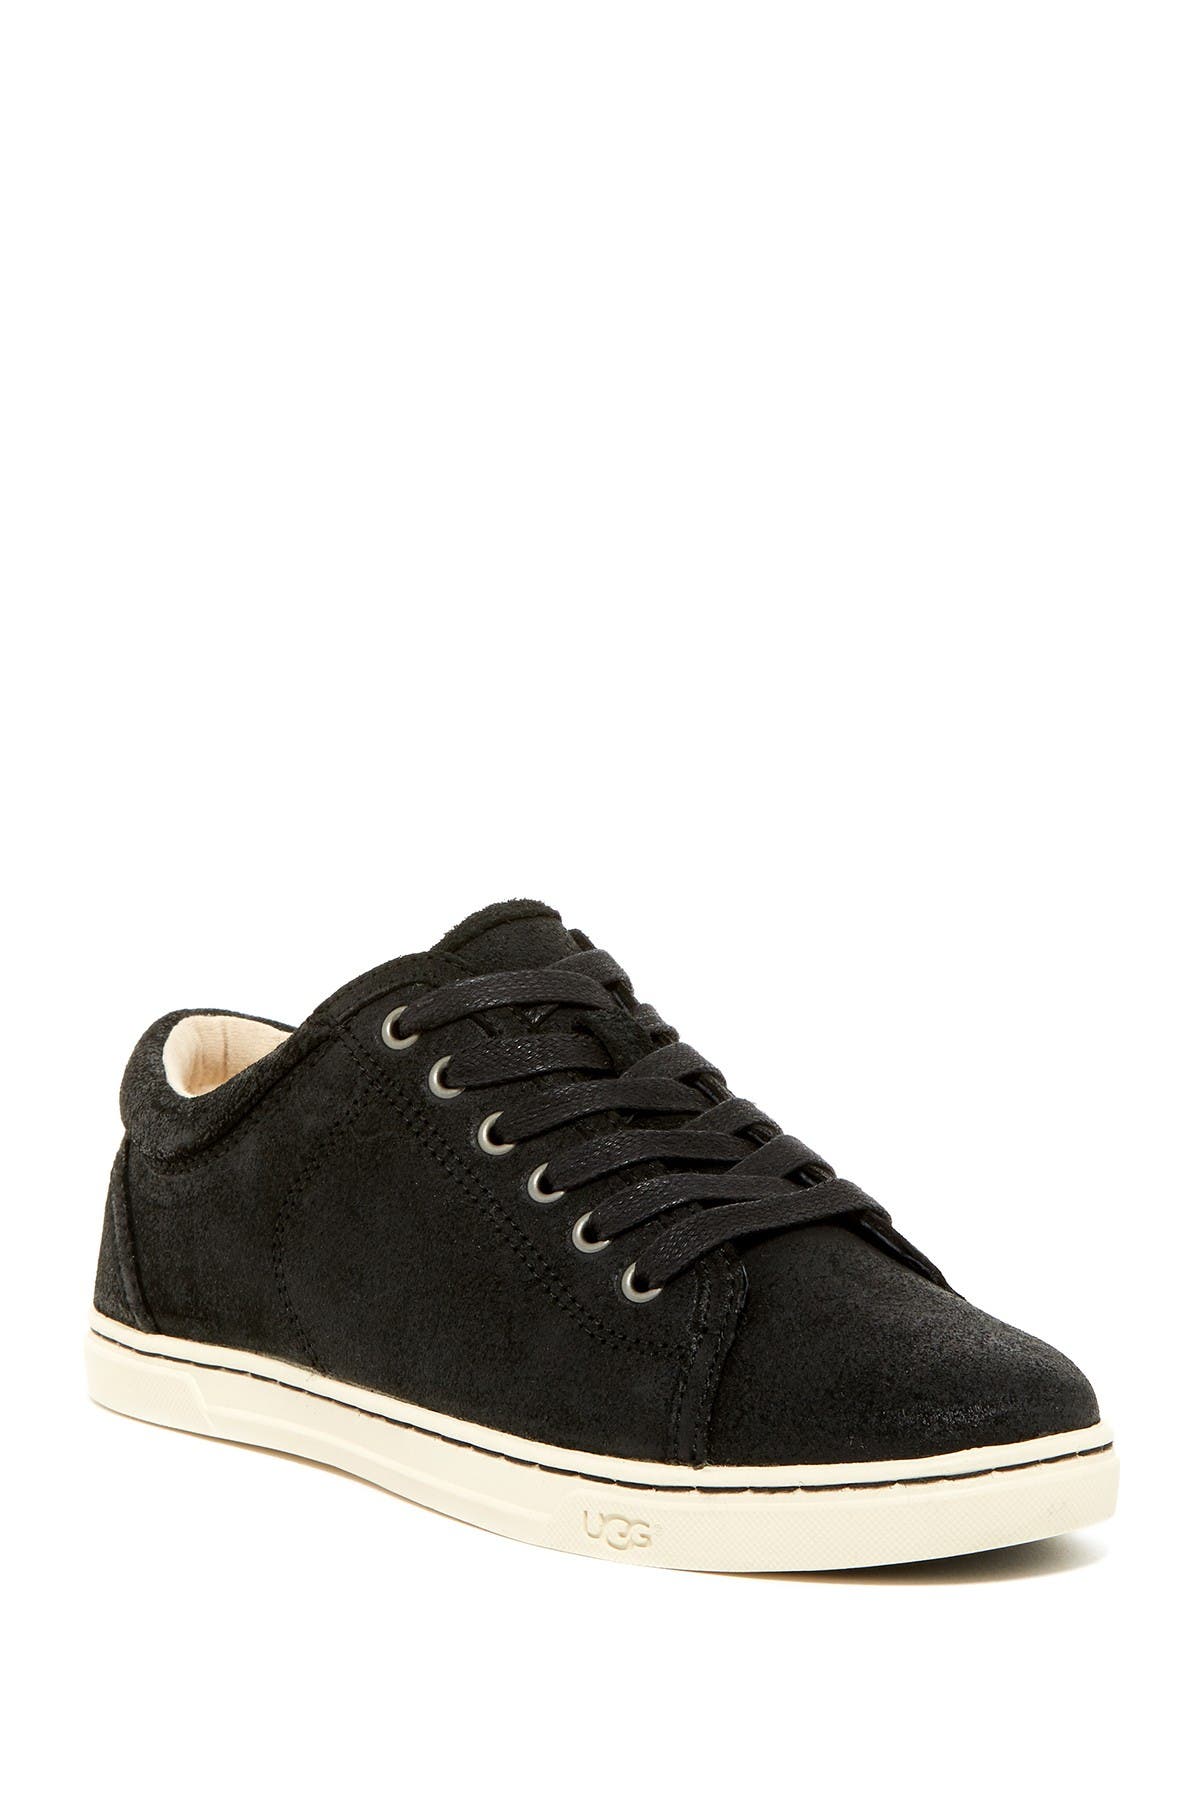 ugg tomi sneakers